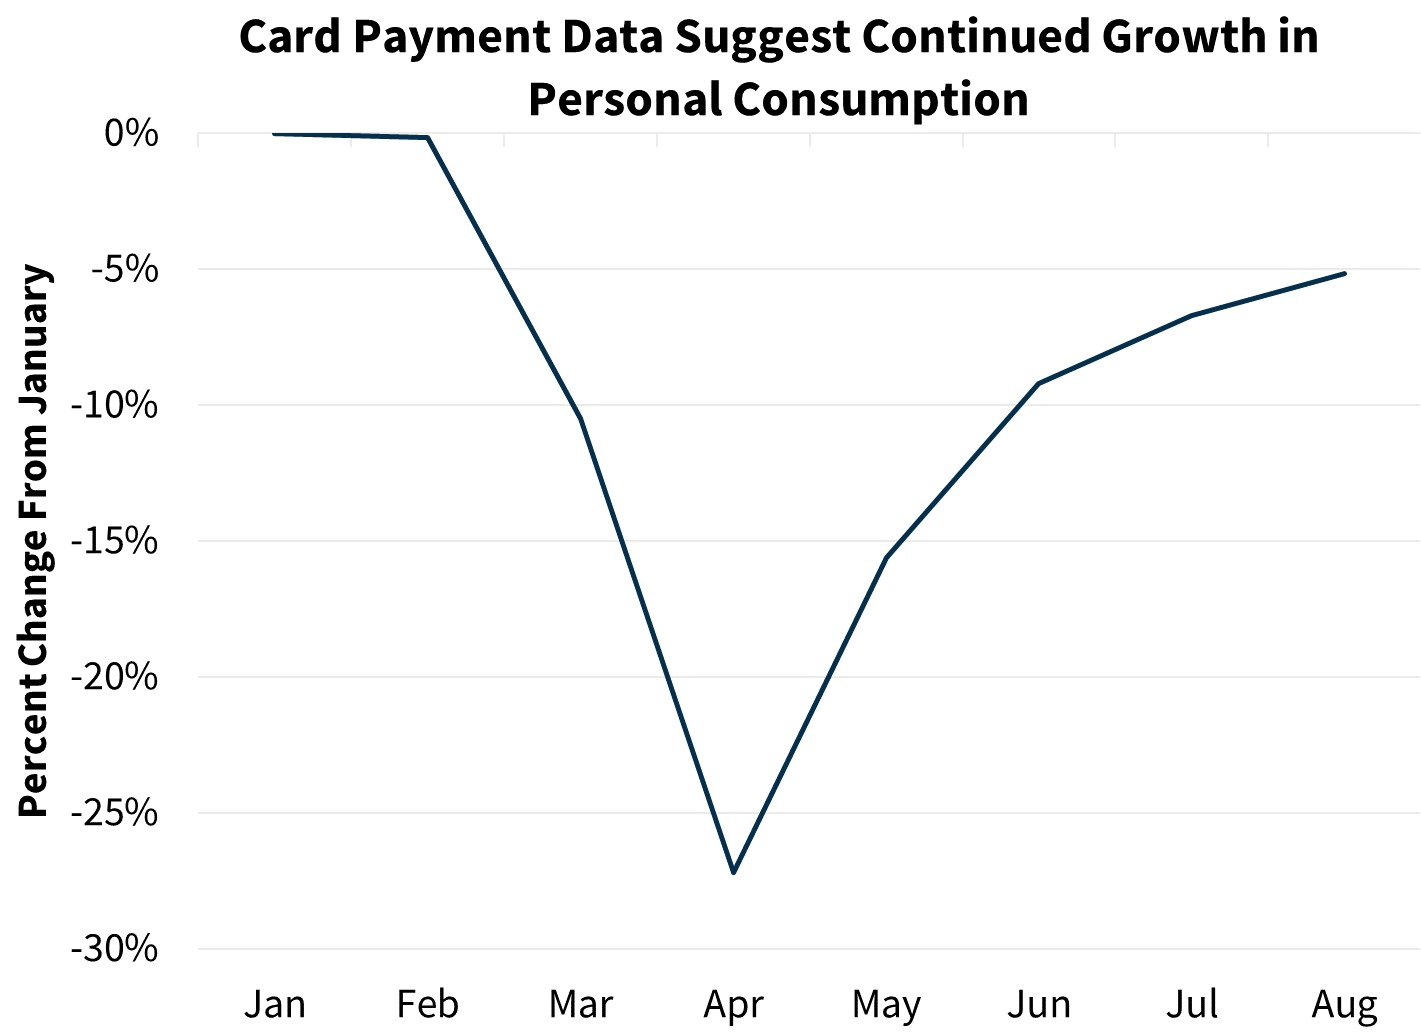  Card Payment Data Suggest Continued Growth in Personal Consumption 